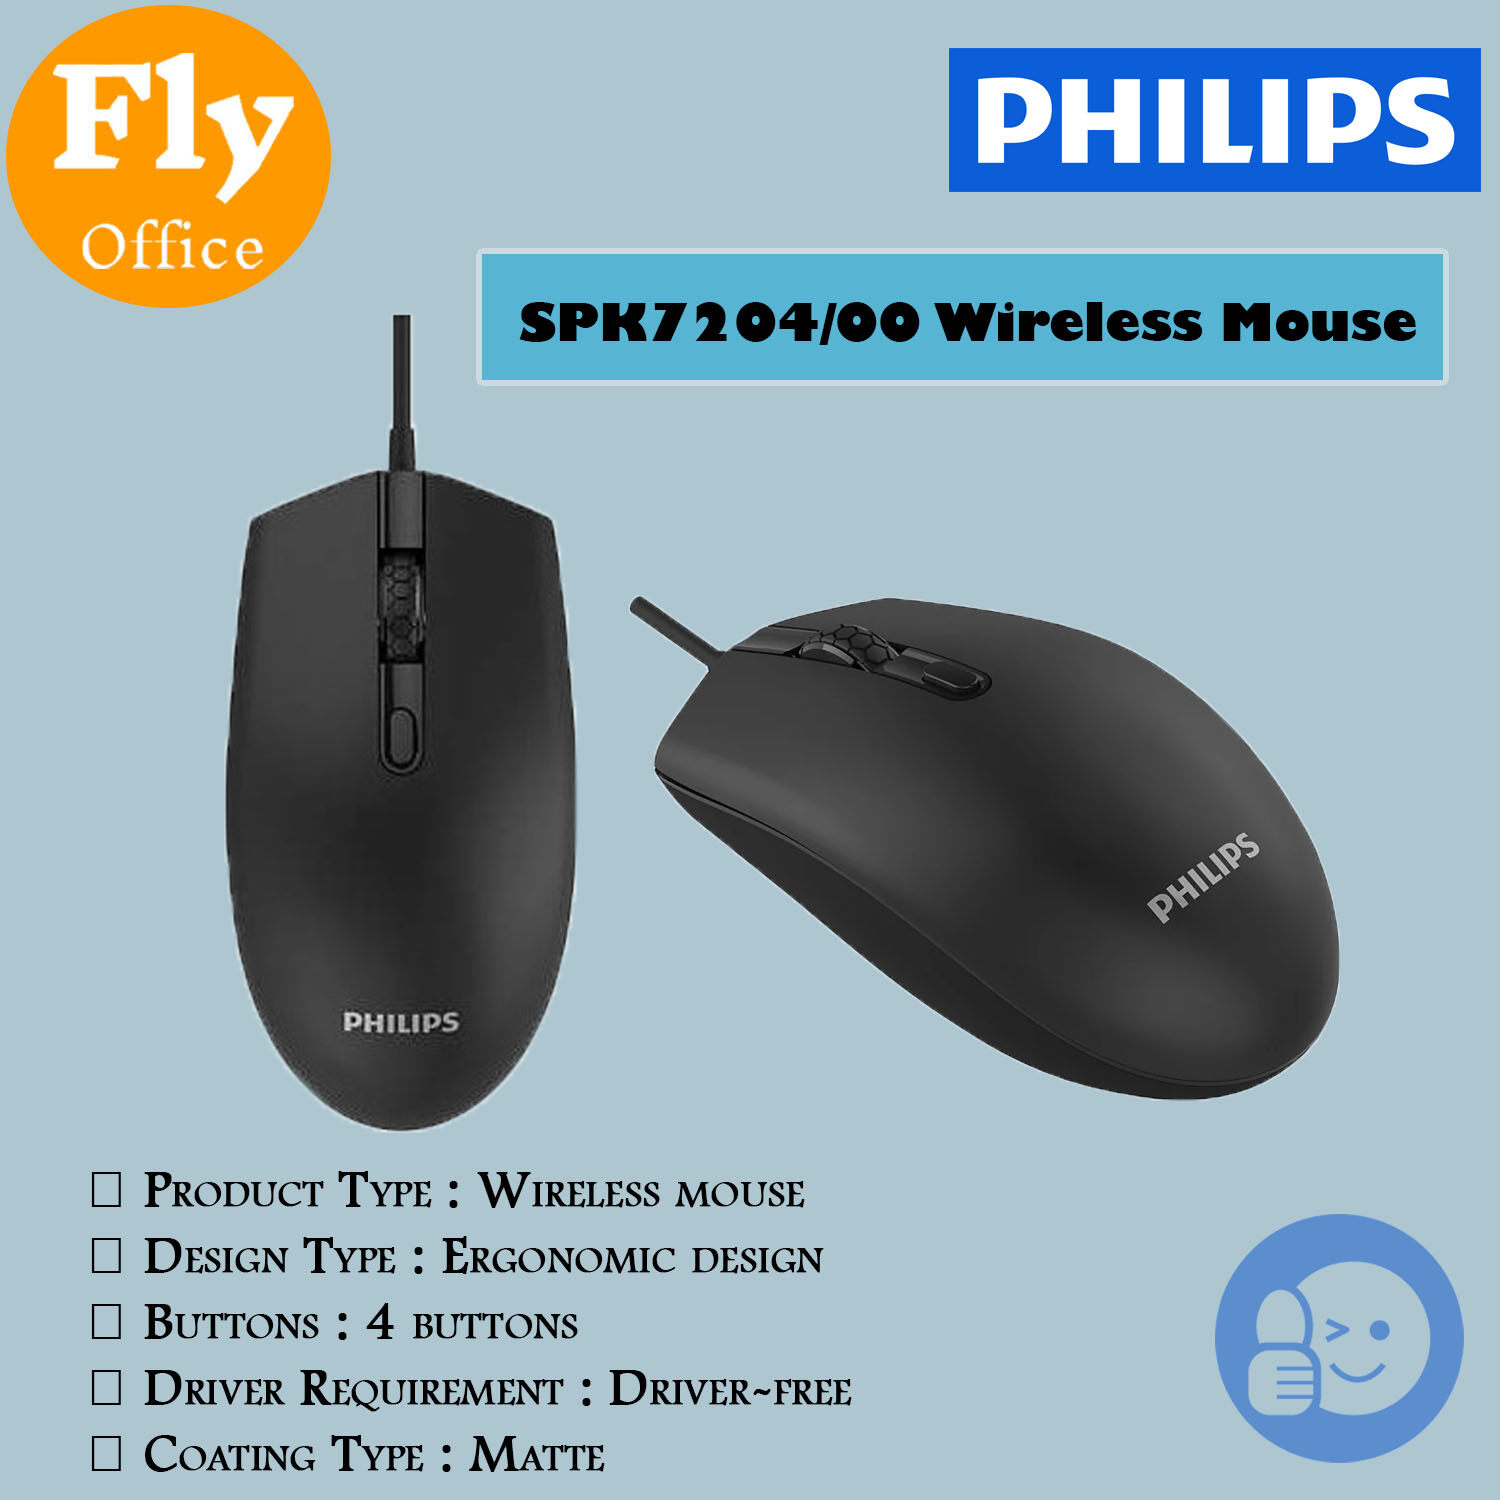 Philips M204 (SPK7204)- 4-Button Mouse for Laptop, PC or Mac OS | Optical Wired Mouse, Adjustable DPI | Quiet & Accurate with Quick-Scroll | Design for Home or Office | Lazada